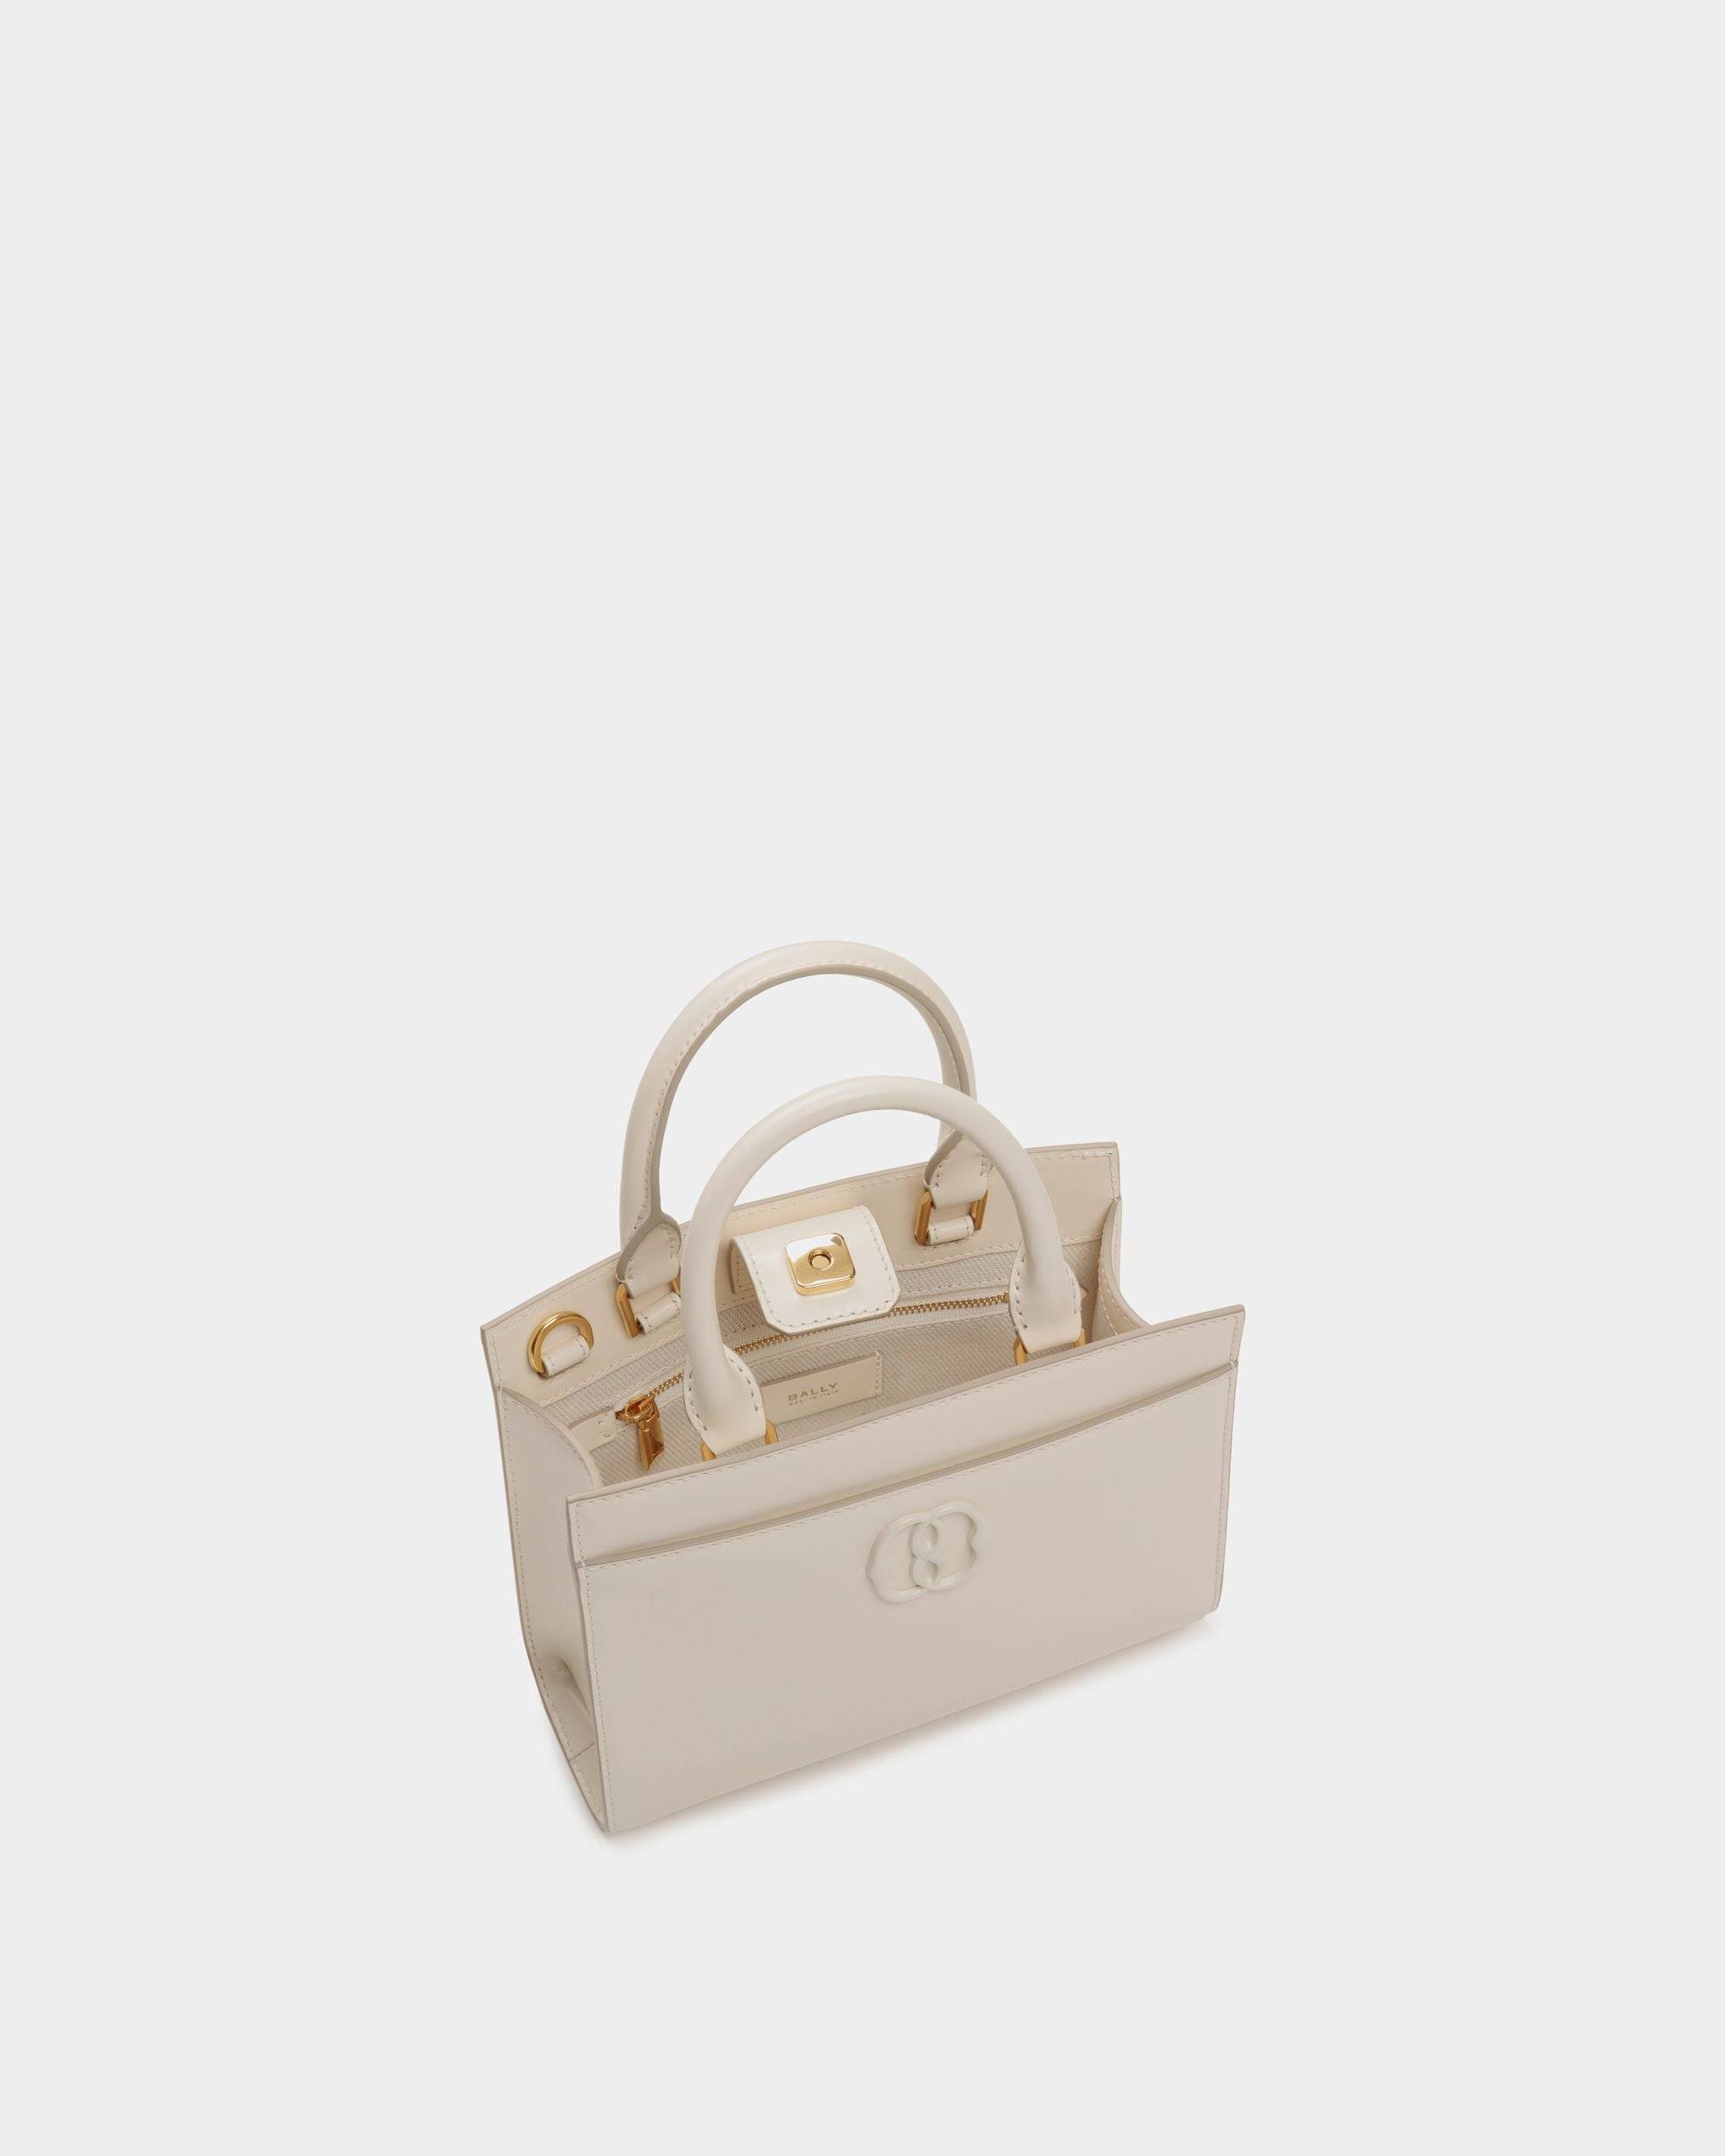 Emblem | Women's Small Tote Bag in White Brushed Leather | Bally | Still Life Open / Inside